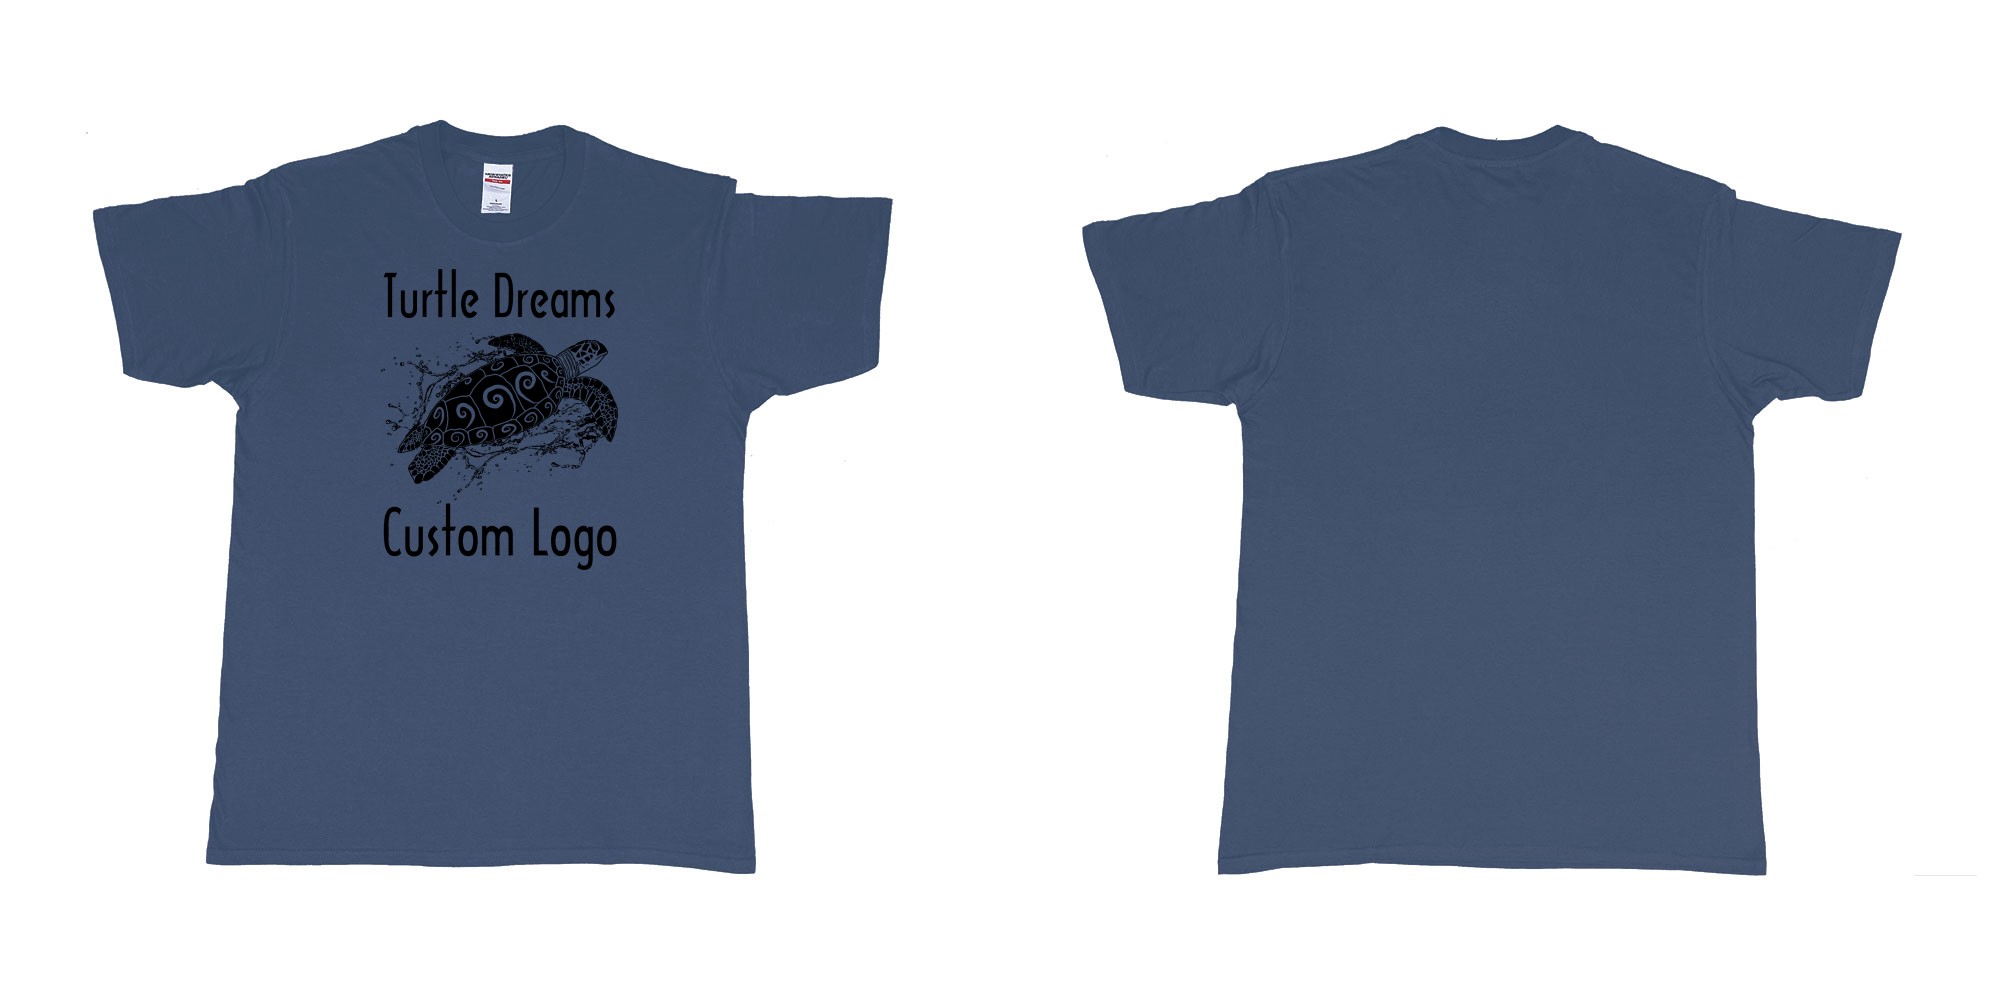 Custom tshirt design turtle dreams custom logo design in fabric color navy choice your own text made in Bali by The Pirate Way